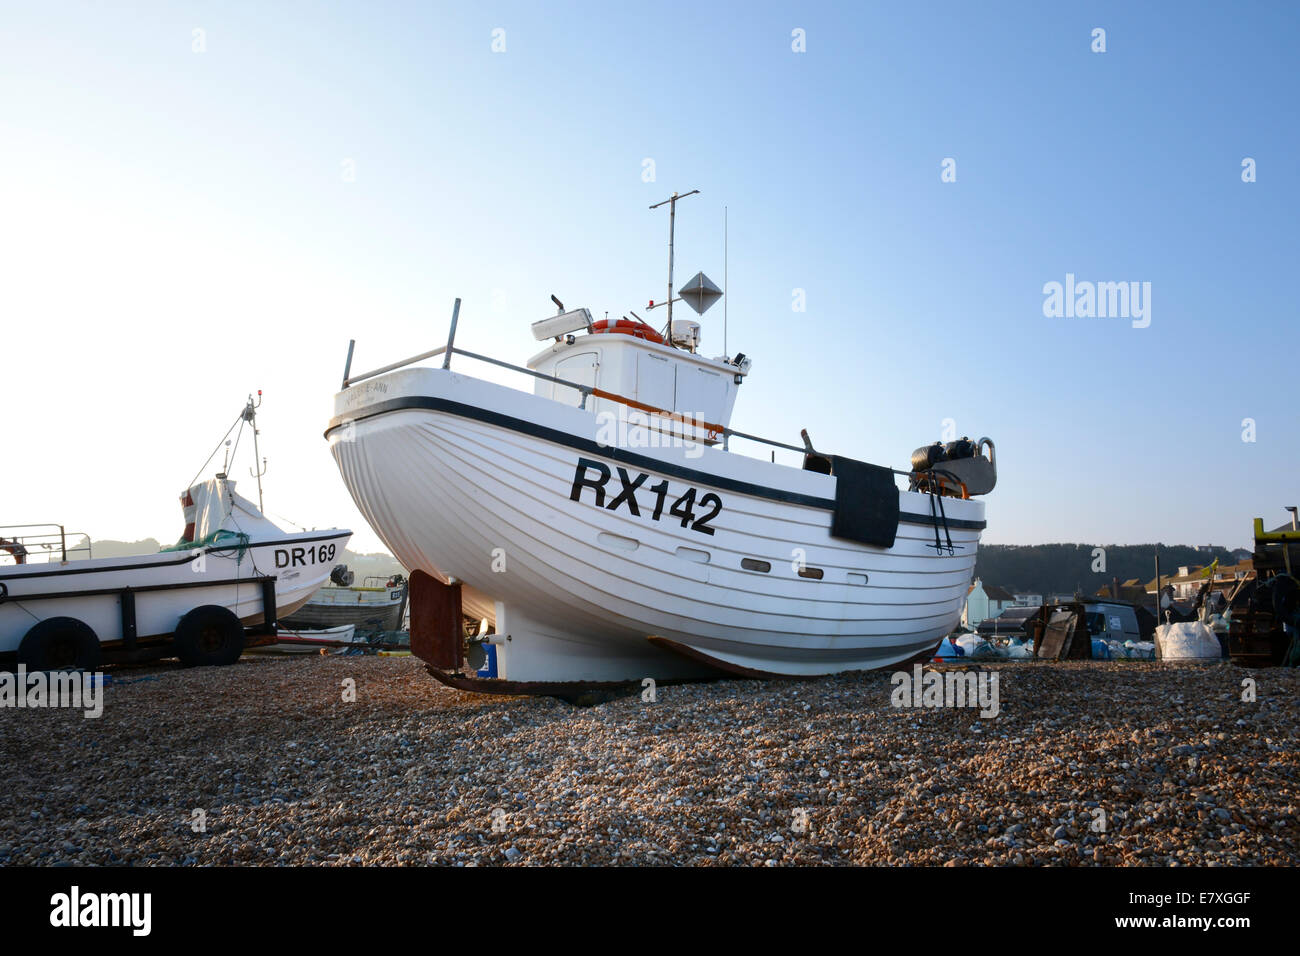 Fishing boats on the beach by Rock-a-Nore Road, The Stade, Hastings, East Sussex, United Kingdom Stock Photo